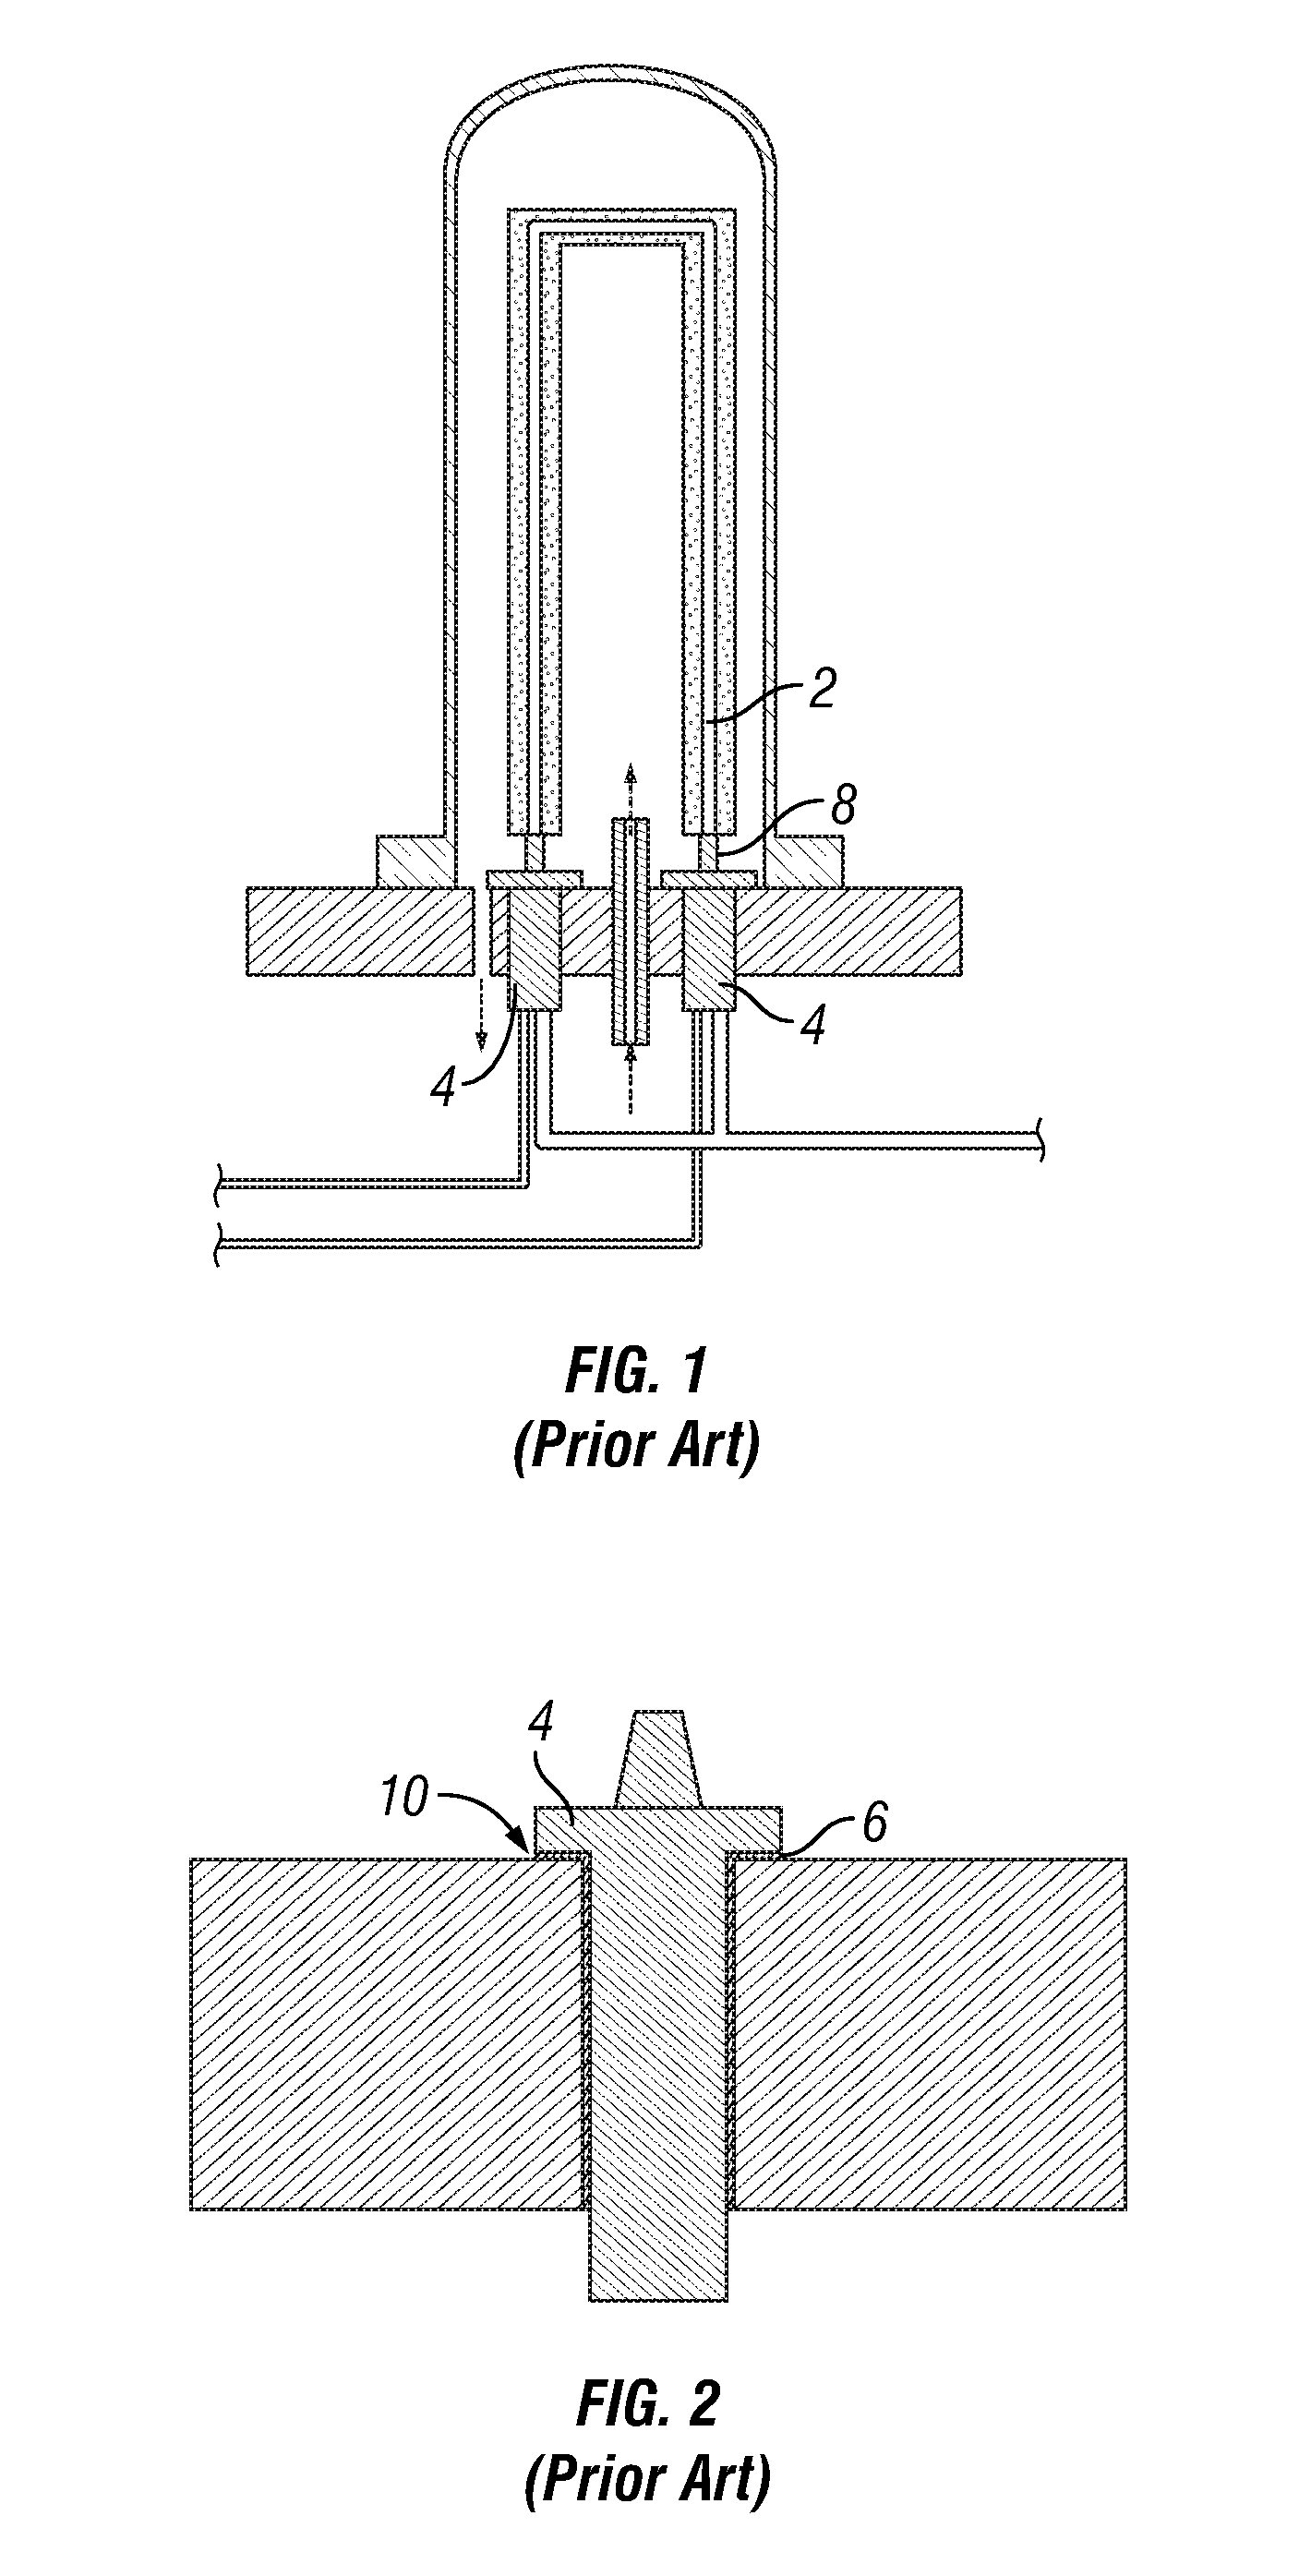 High temperature and high voltage electrode assembly design